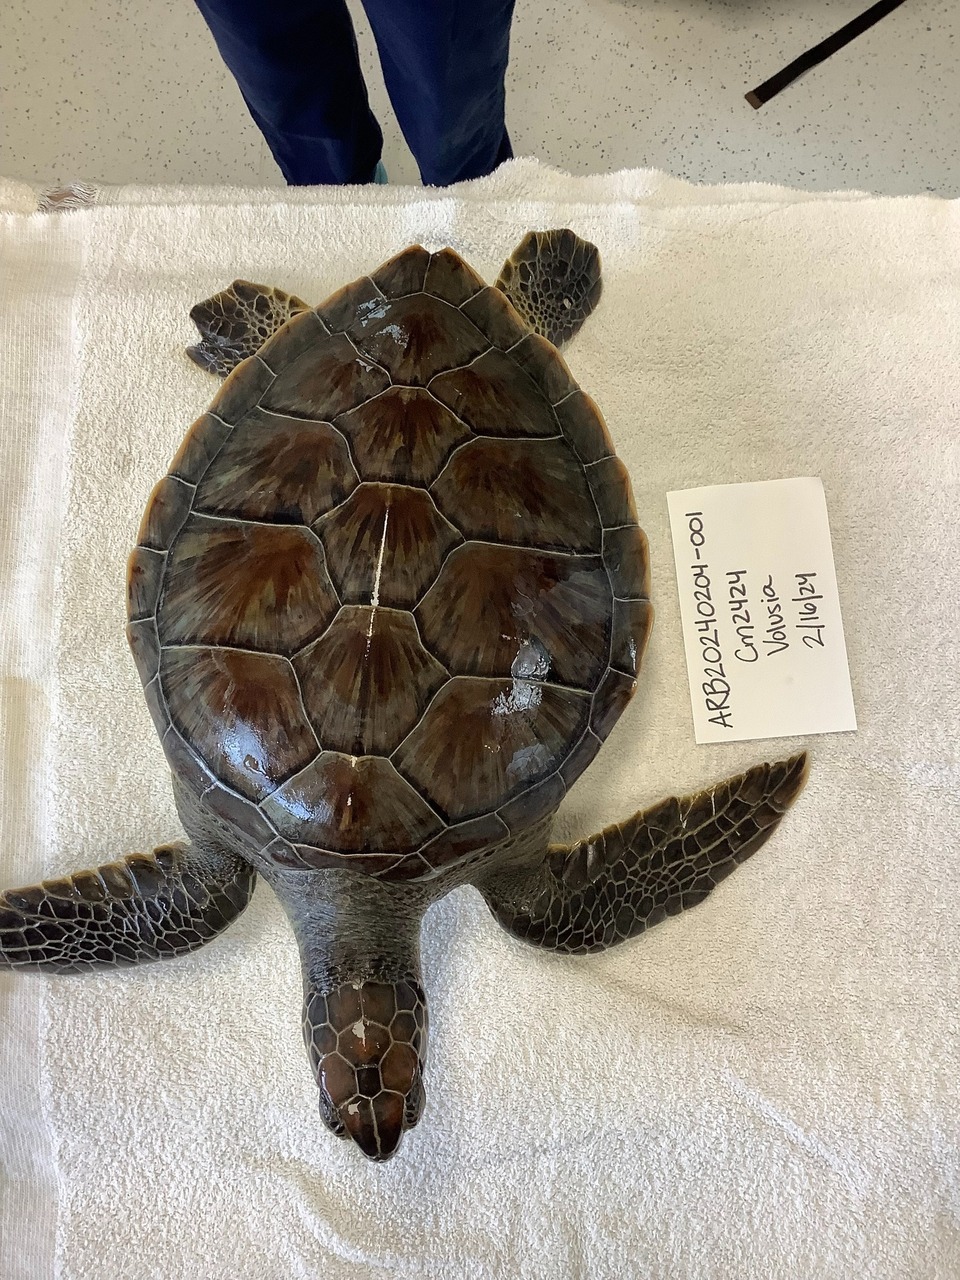 Marine Science Center Set to Release Four Green Sea Turtles Today